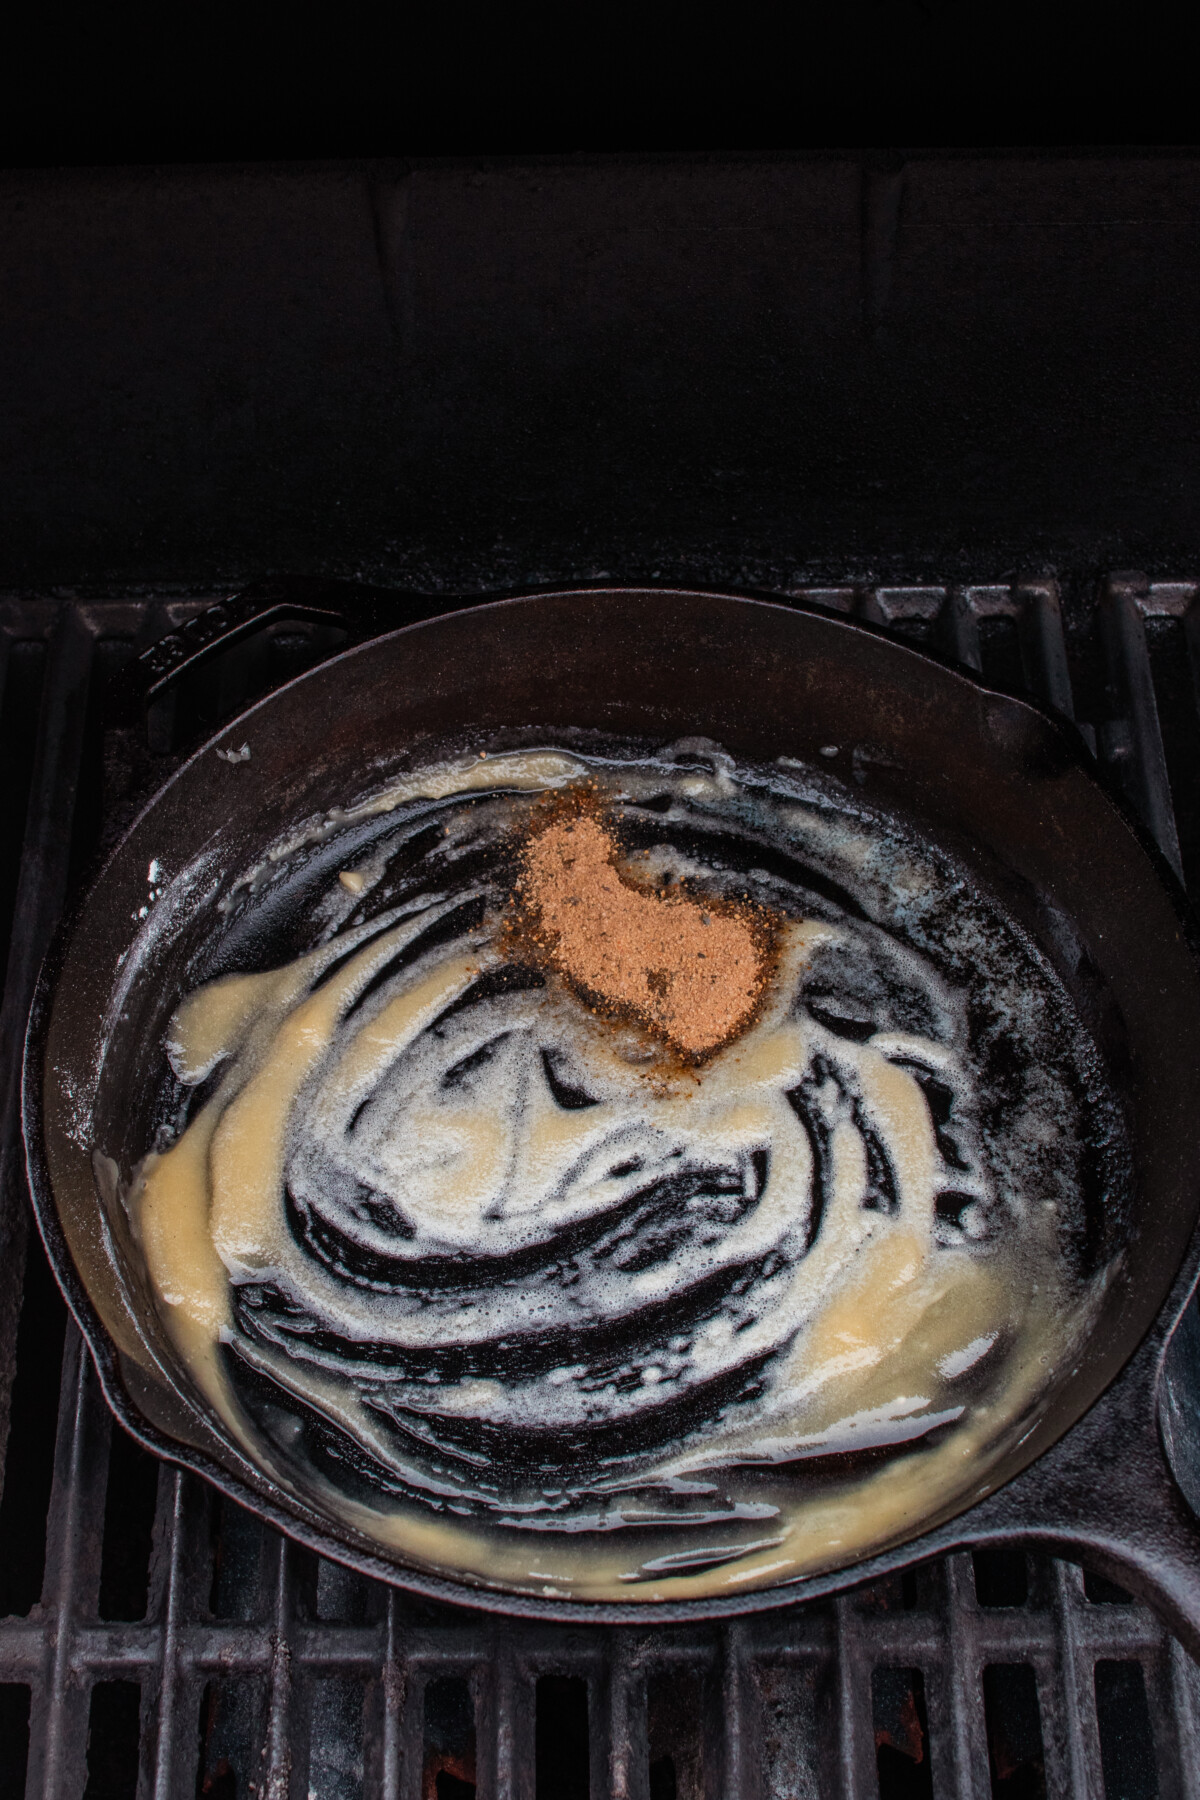 Roux being formed with butter and flour and umami powder added in cast iron skillet on grill.